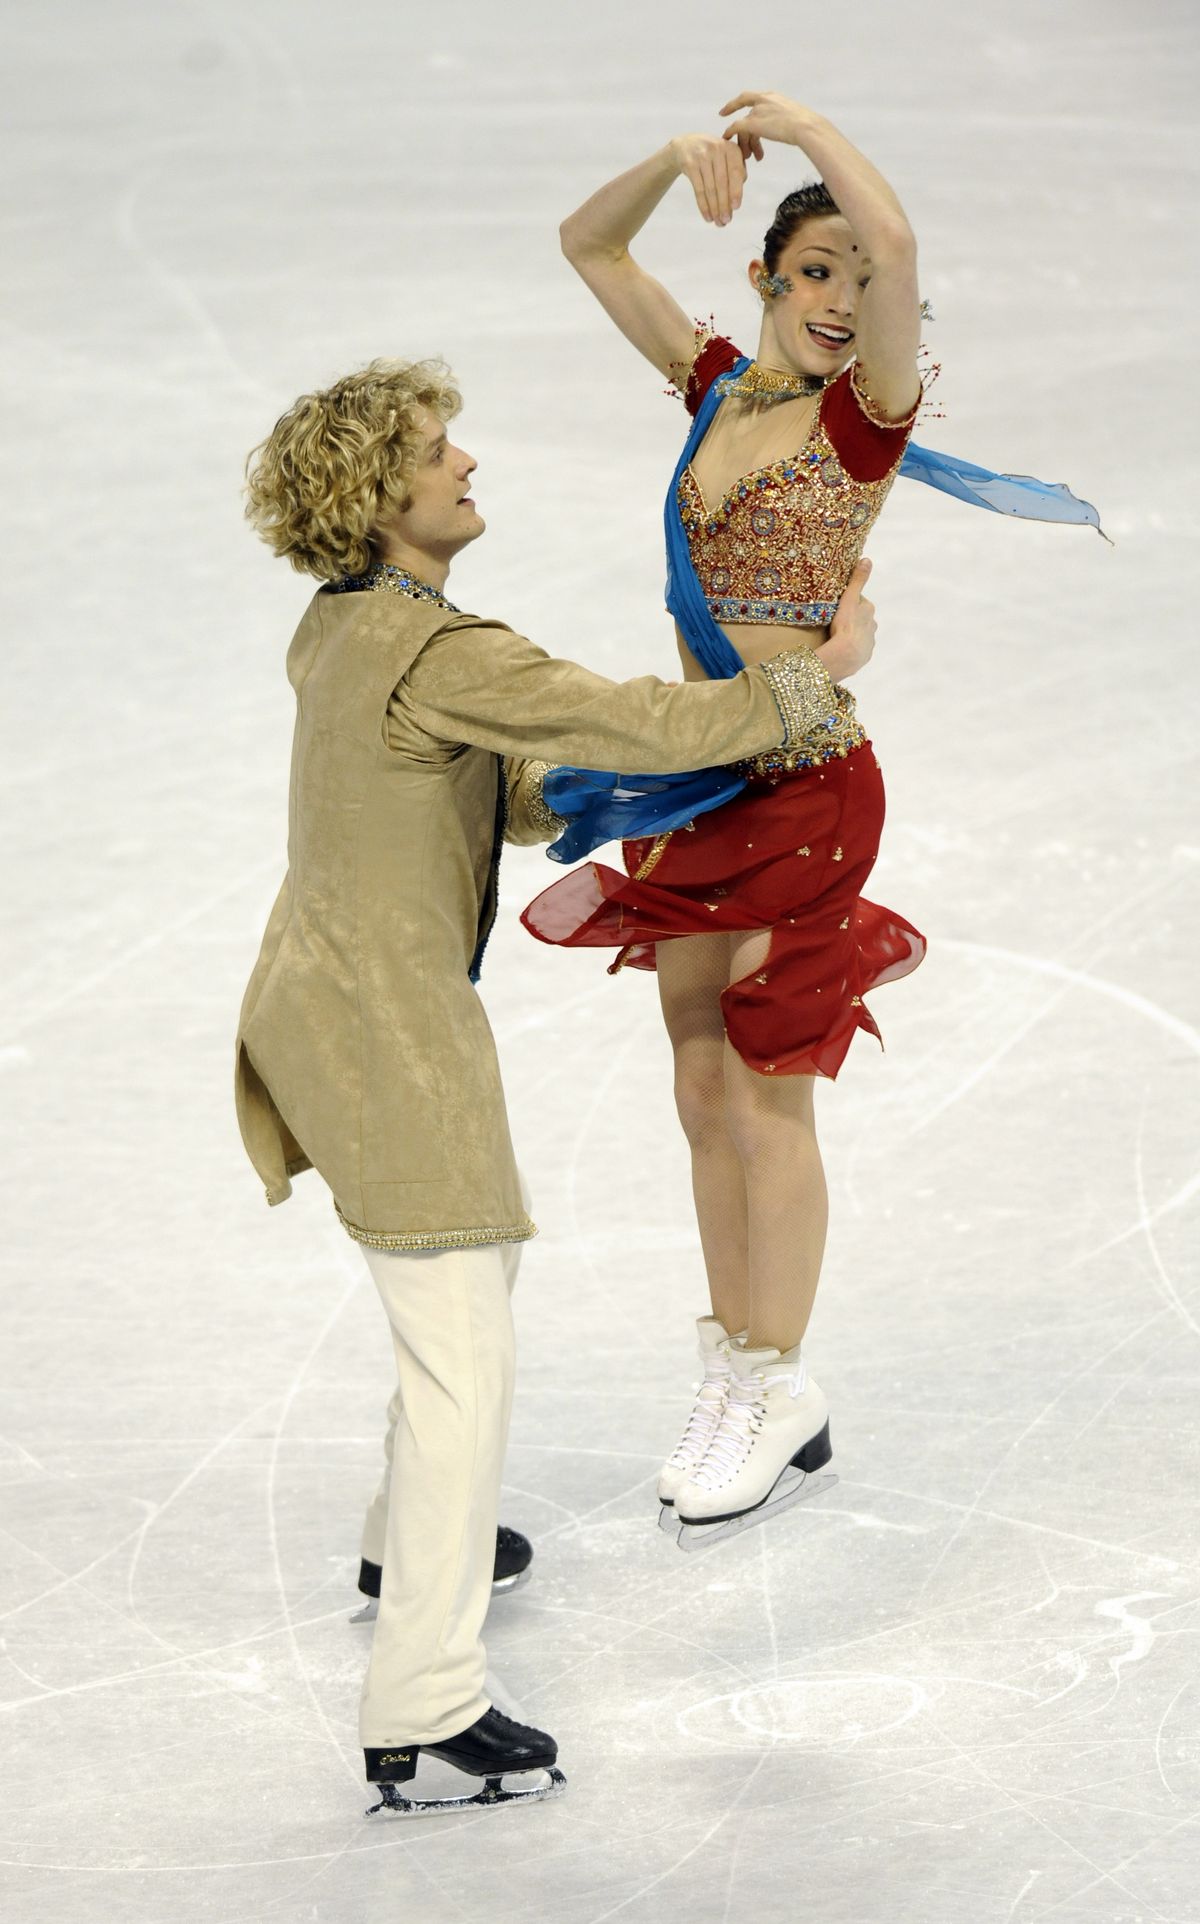 Meryl Davis and Charlie White perform their Championship Dance original dance program at the U.S. Figure Skating Championships in the Spokane Arena on Friday, Jan 22, 2010. (Colin Mulvany / The Spokesman-Review)